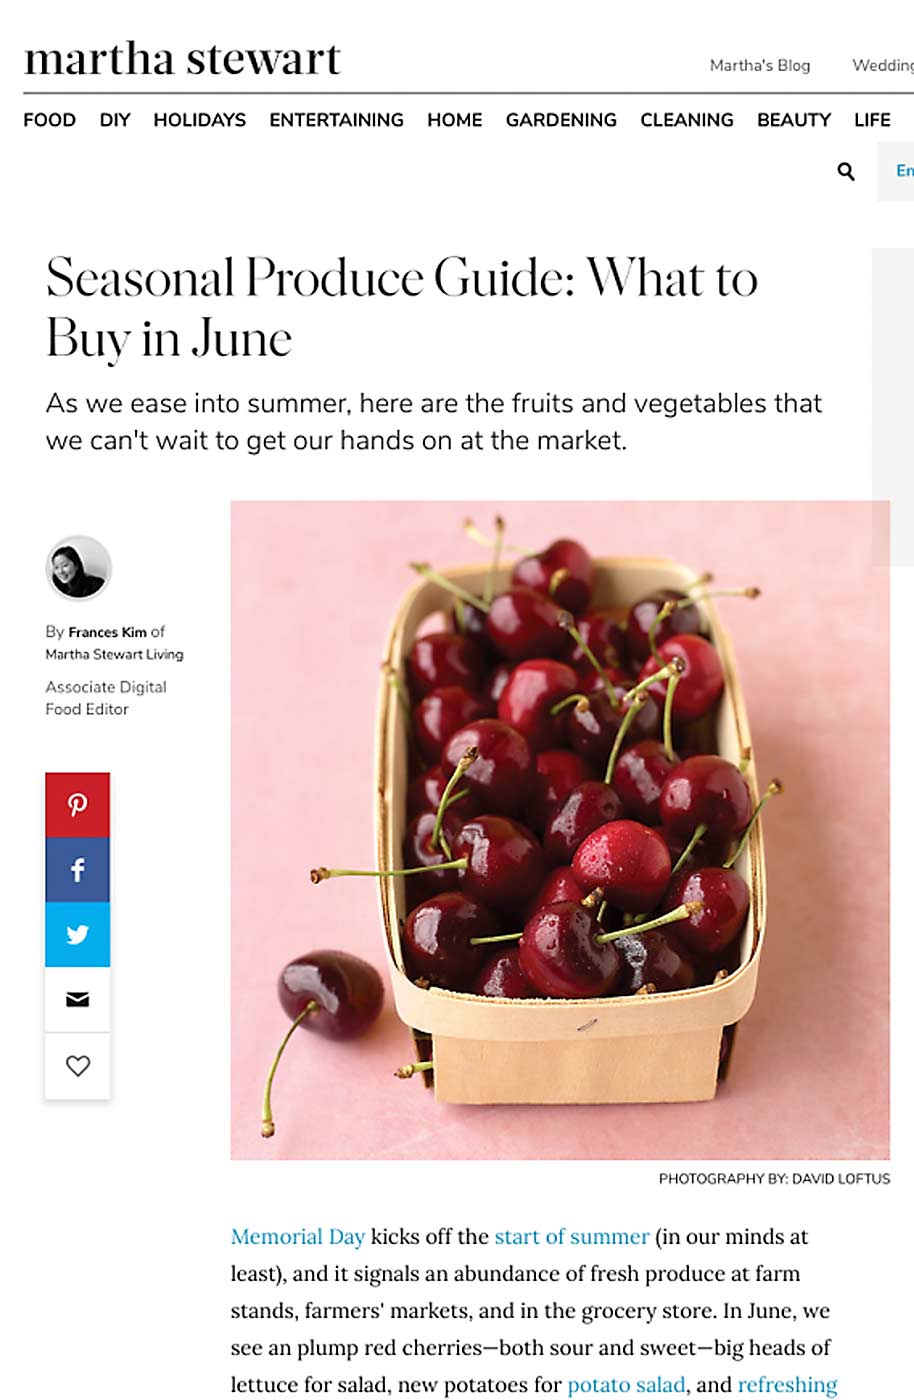 Editorial magazine coverage has been part of cherry marketers’ arsenal. That has moved online, too. (Courtesy James Michael/Northwest Cherry Growers)